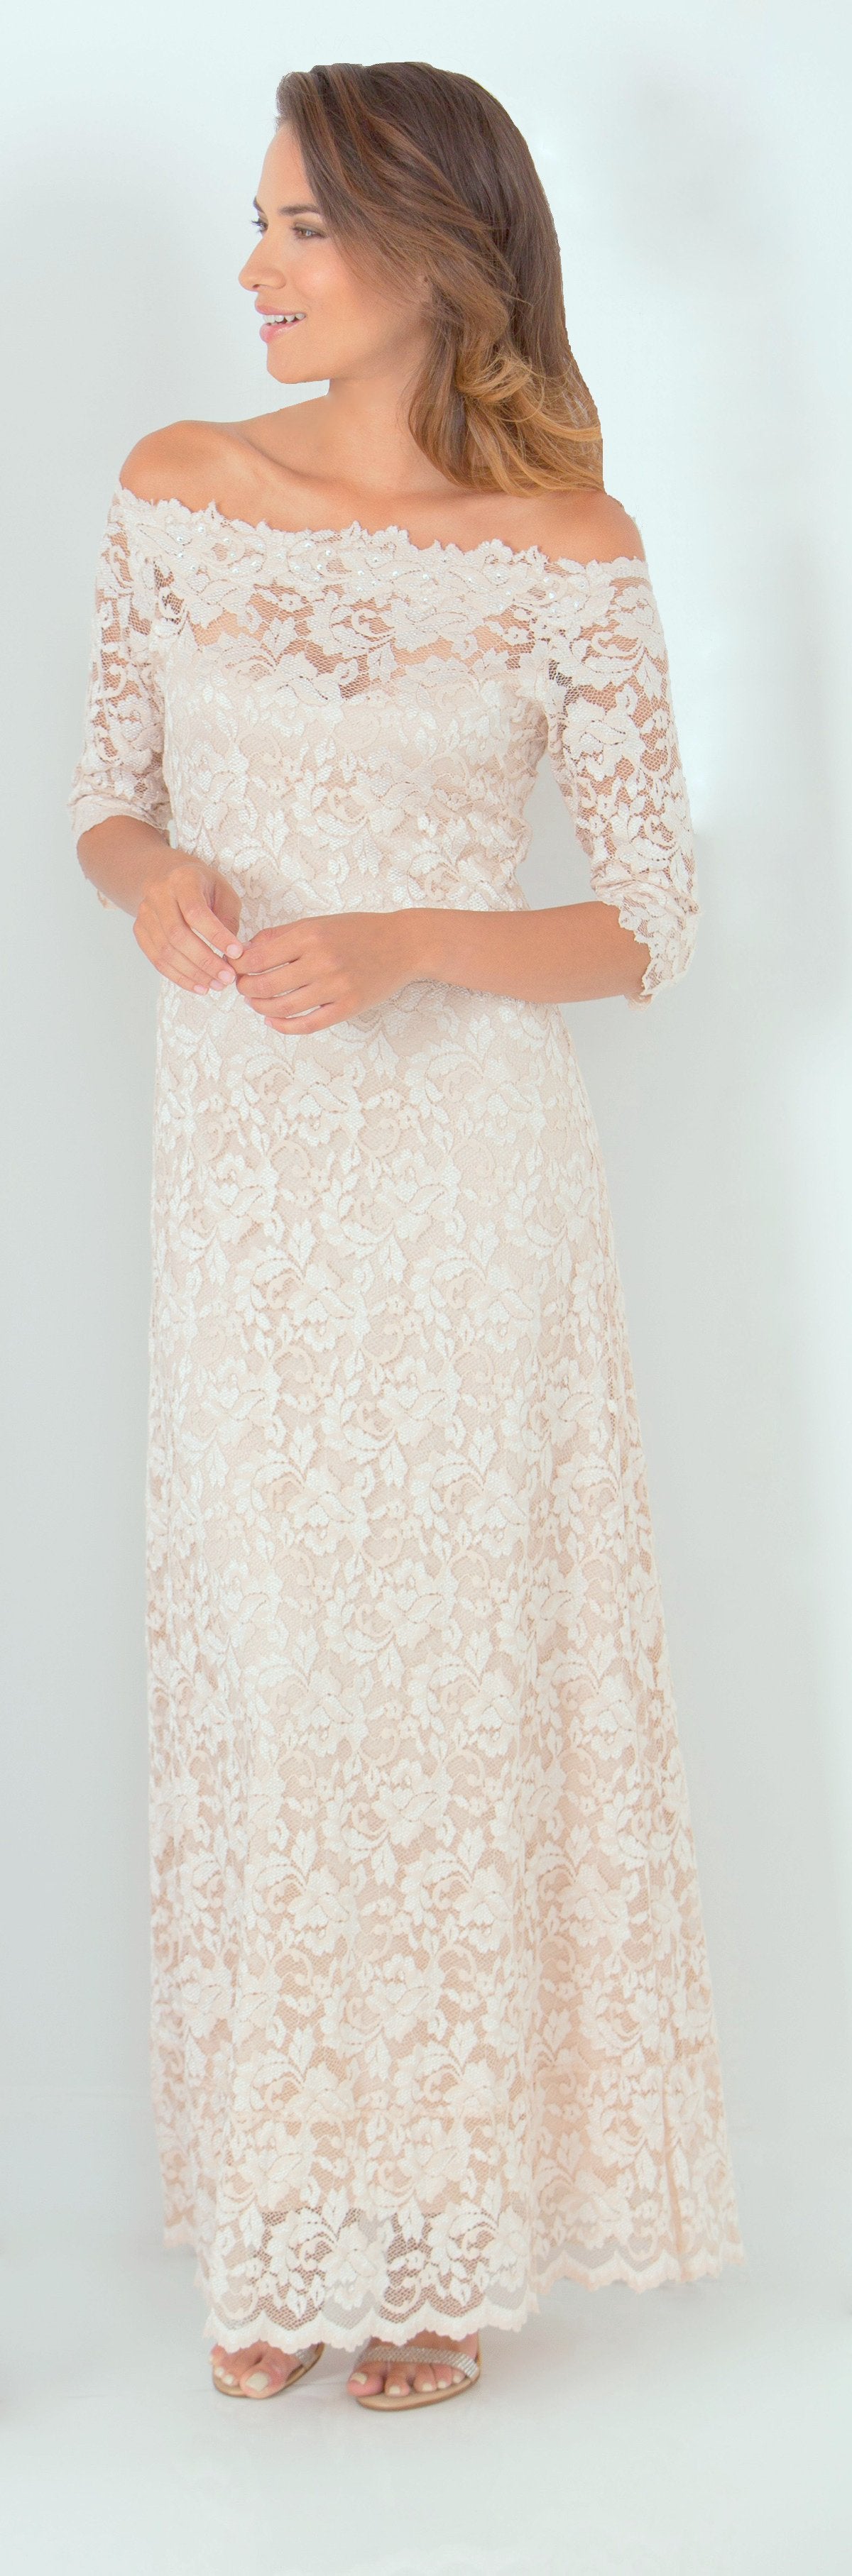 French Flower Lace Full Length Dress - Sara Mique Evening Wear